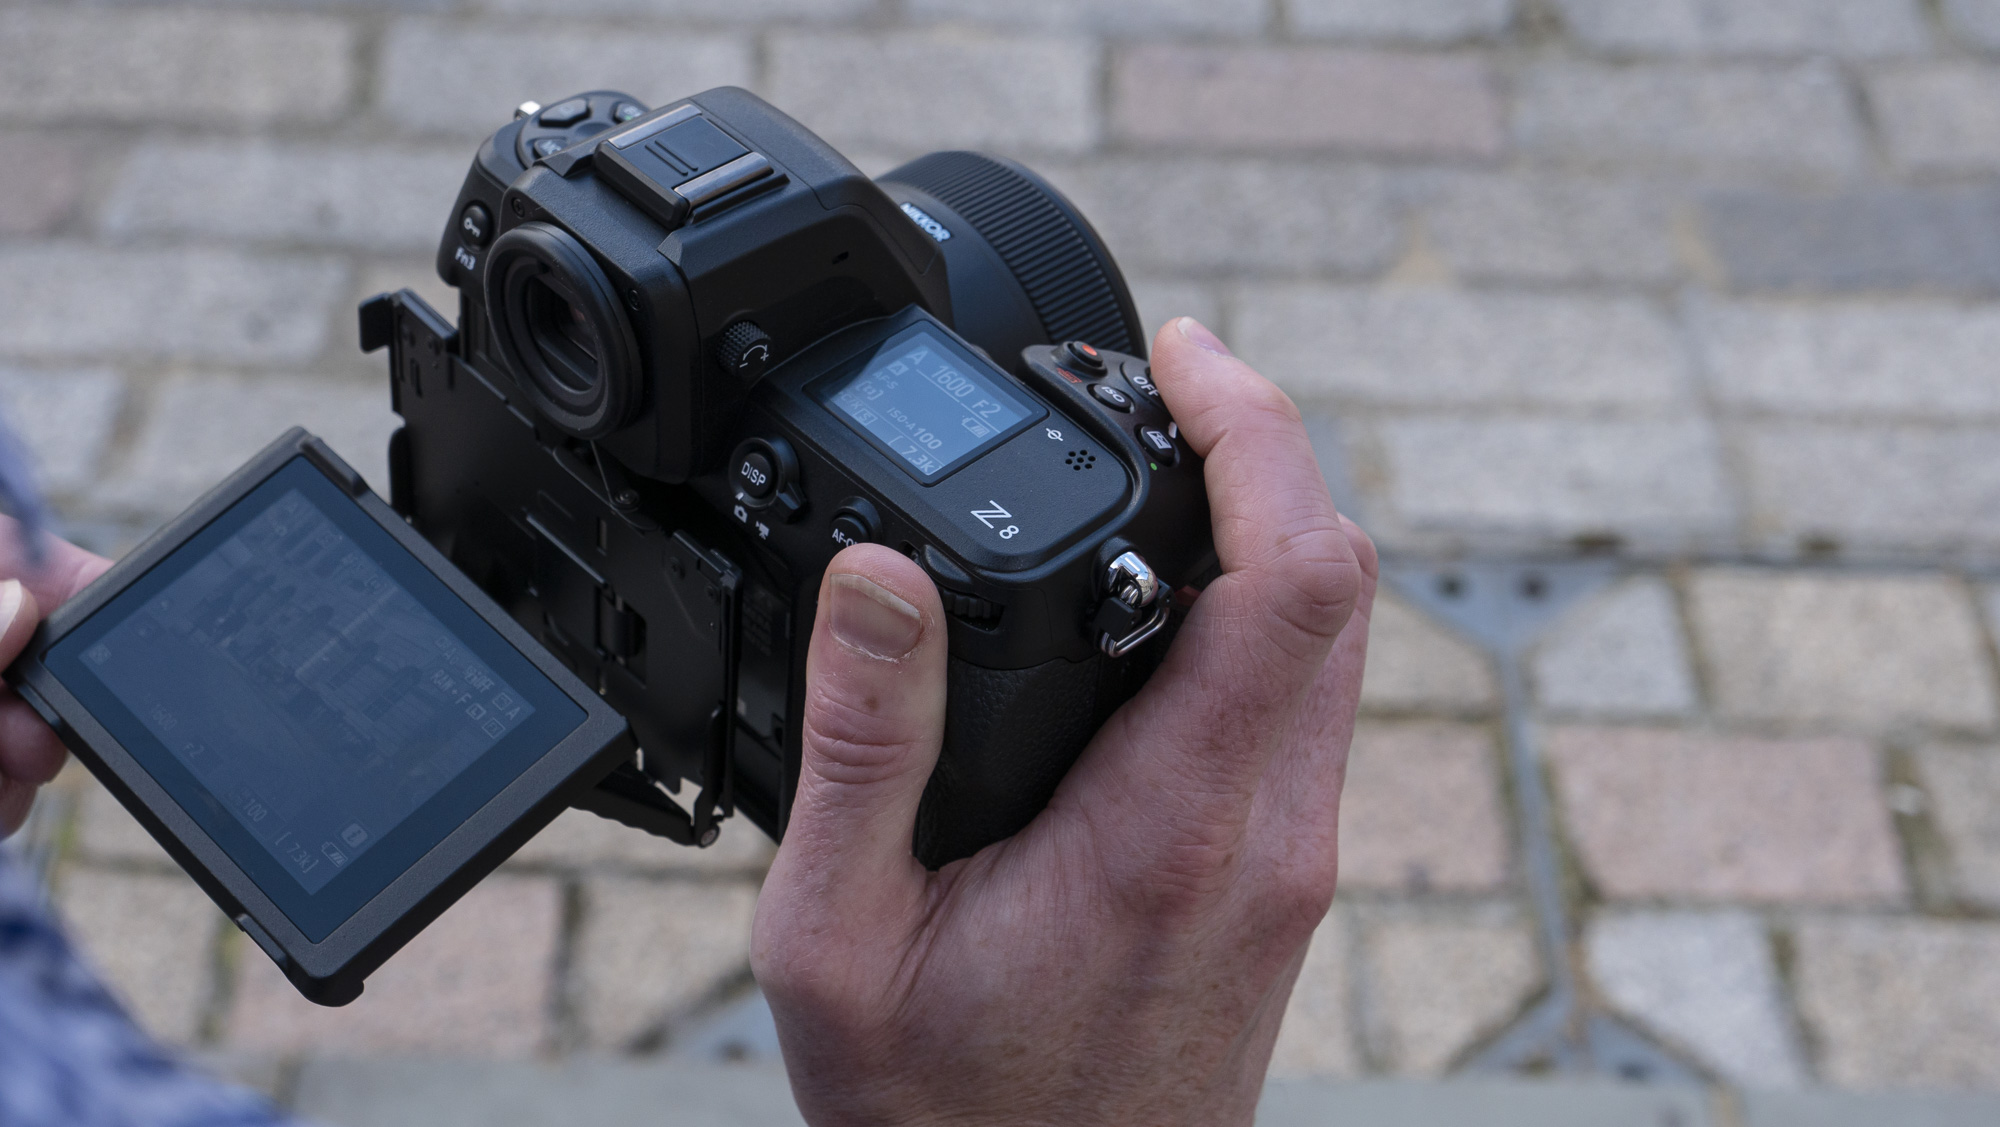 Nikon Z8 camera in the hand with 4-axis screen pulled out